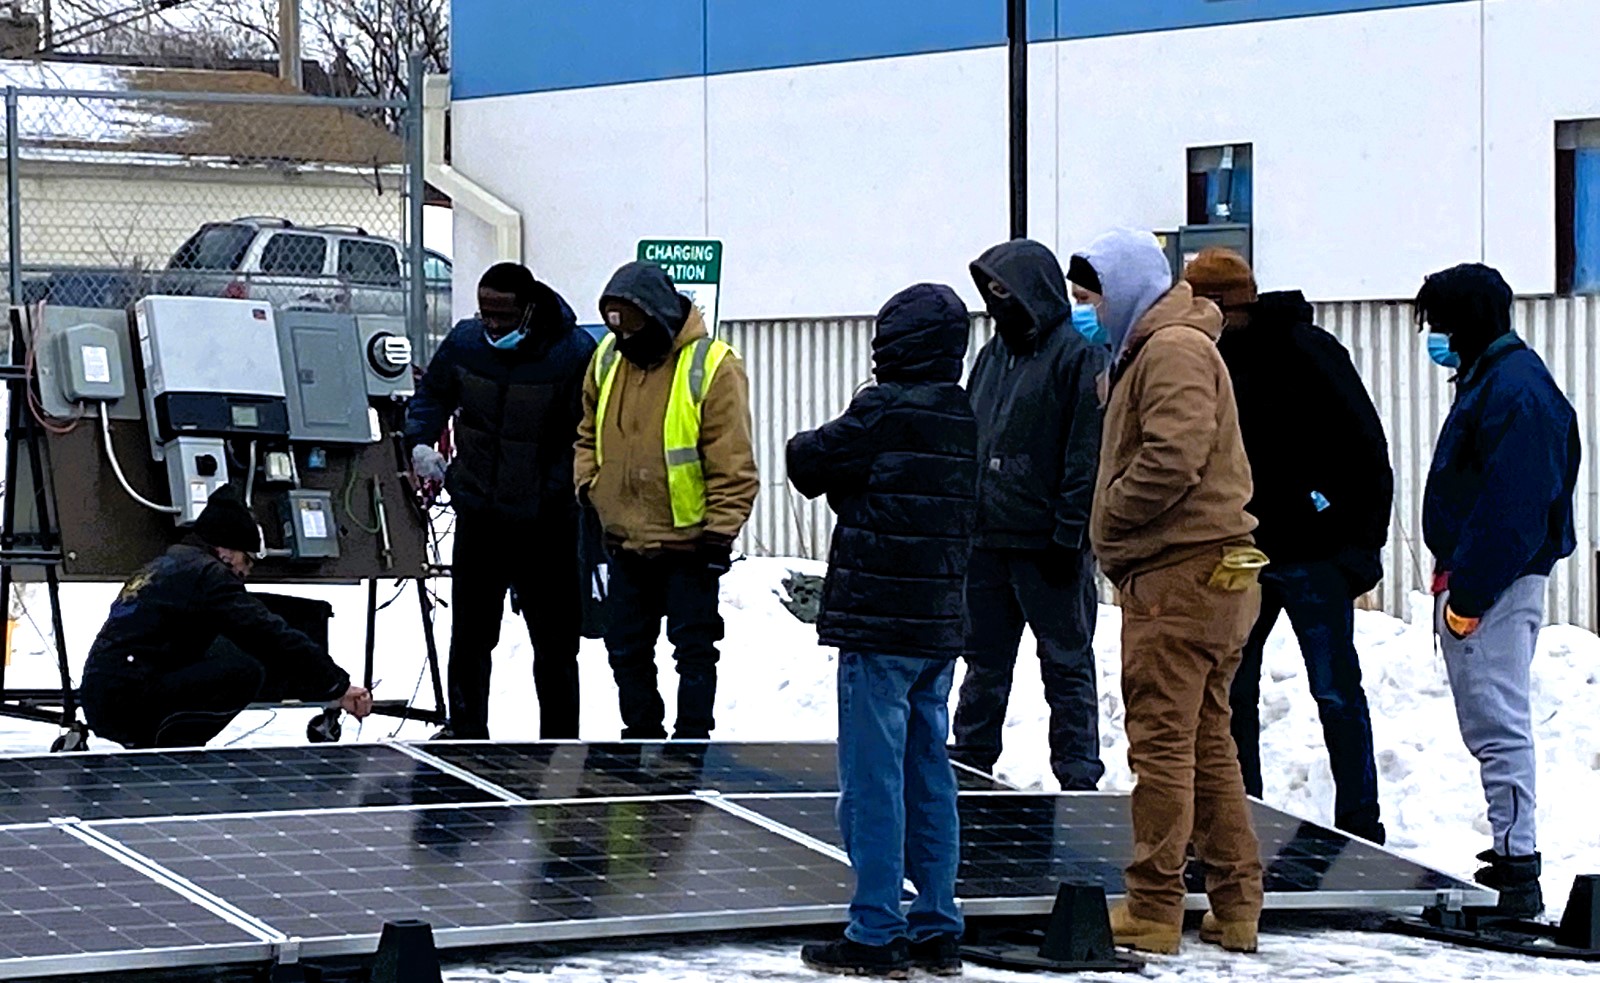 People standing by solar panel